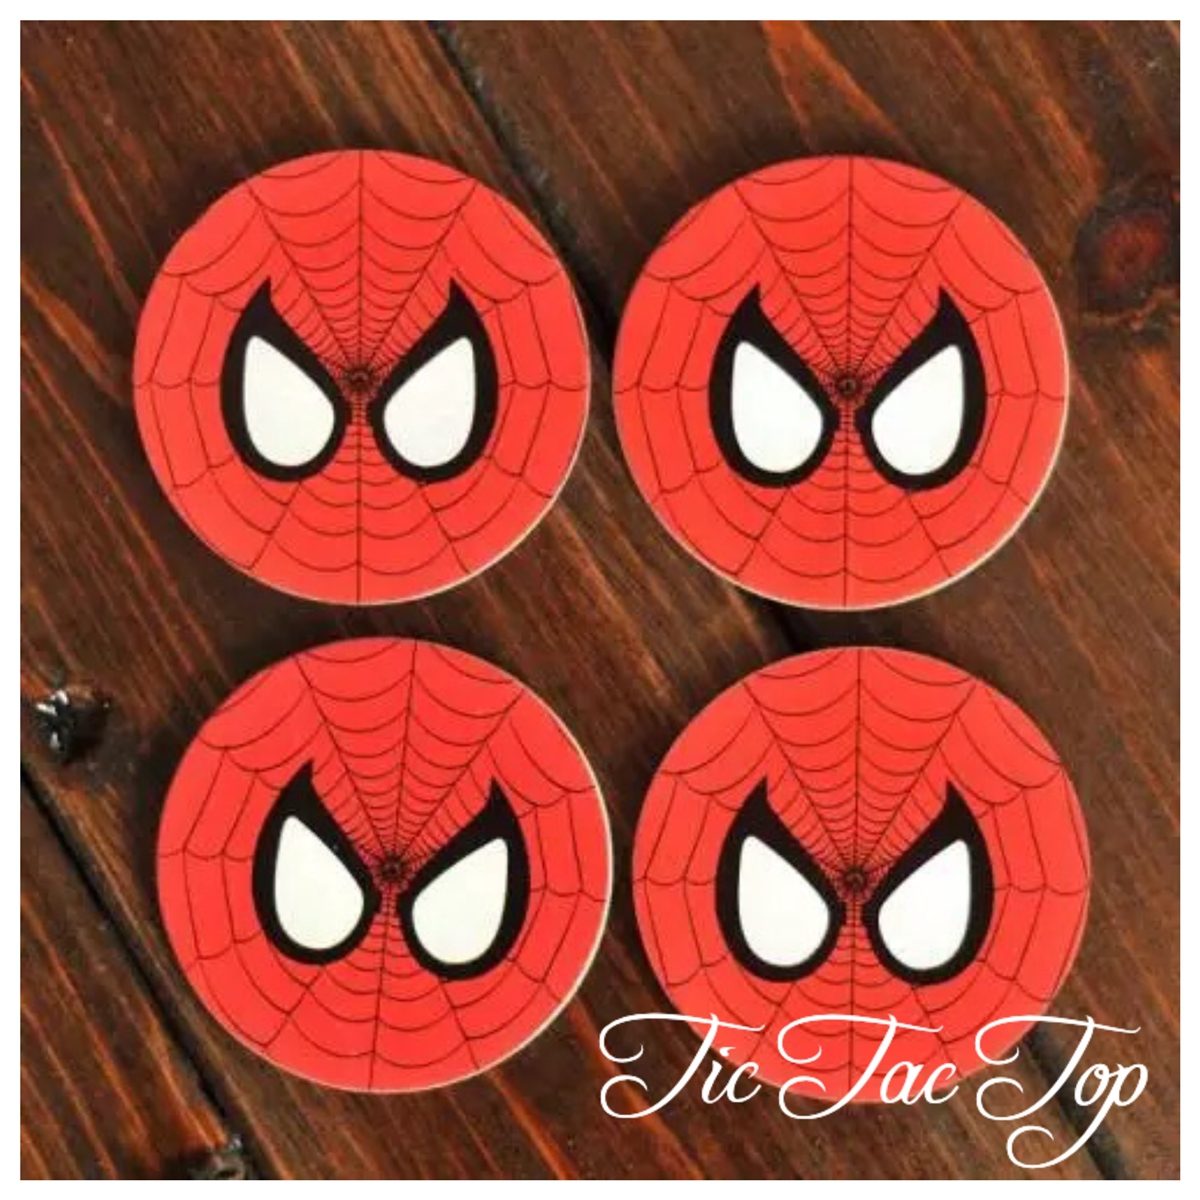 Spiderman Vs Black Spiderman Cupcake Wrappers + Toppers